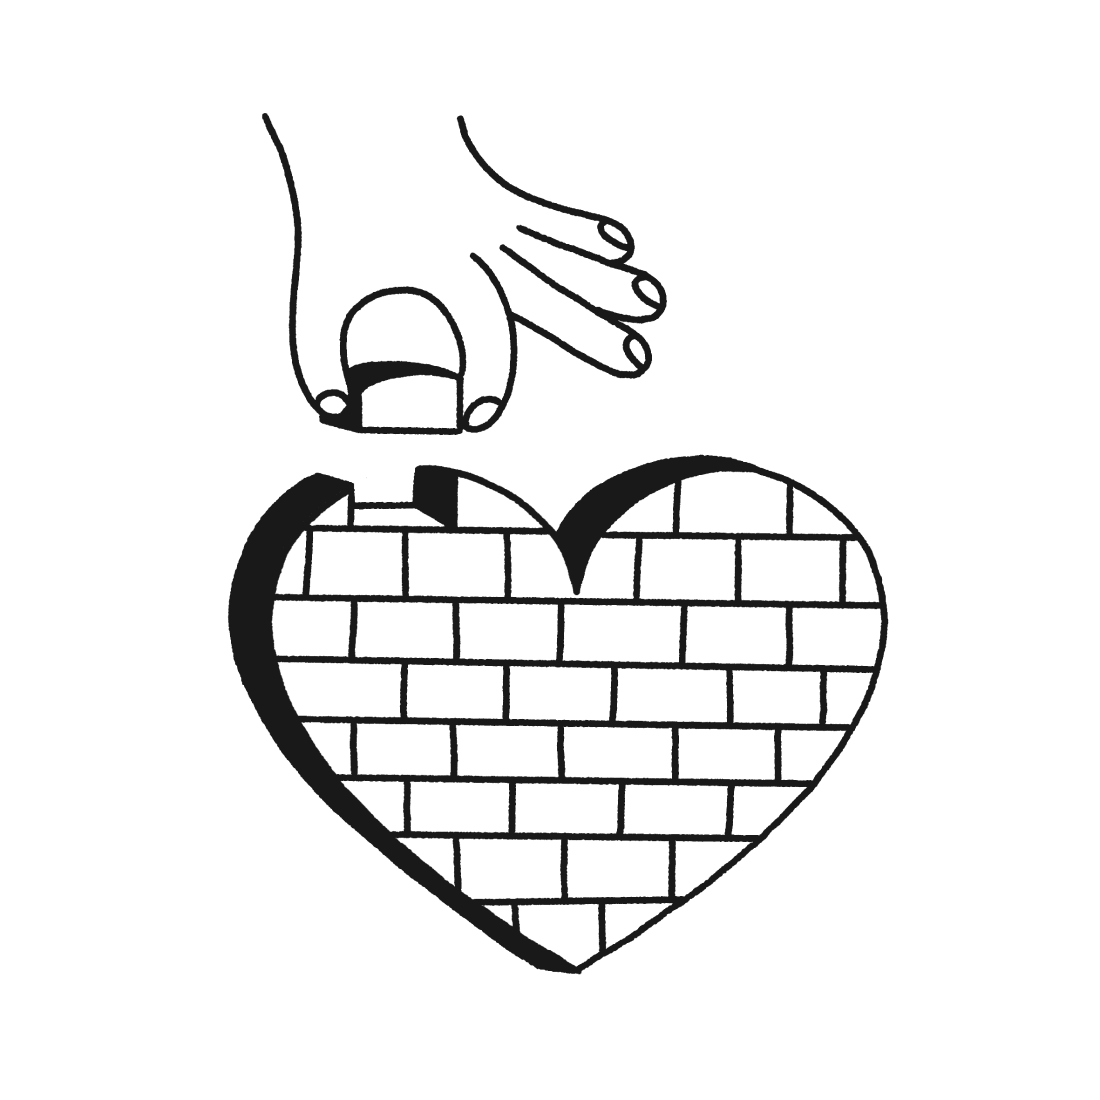 Illustration of a heart made from bricks. There is a hand laying the final brick.